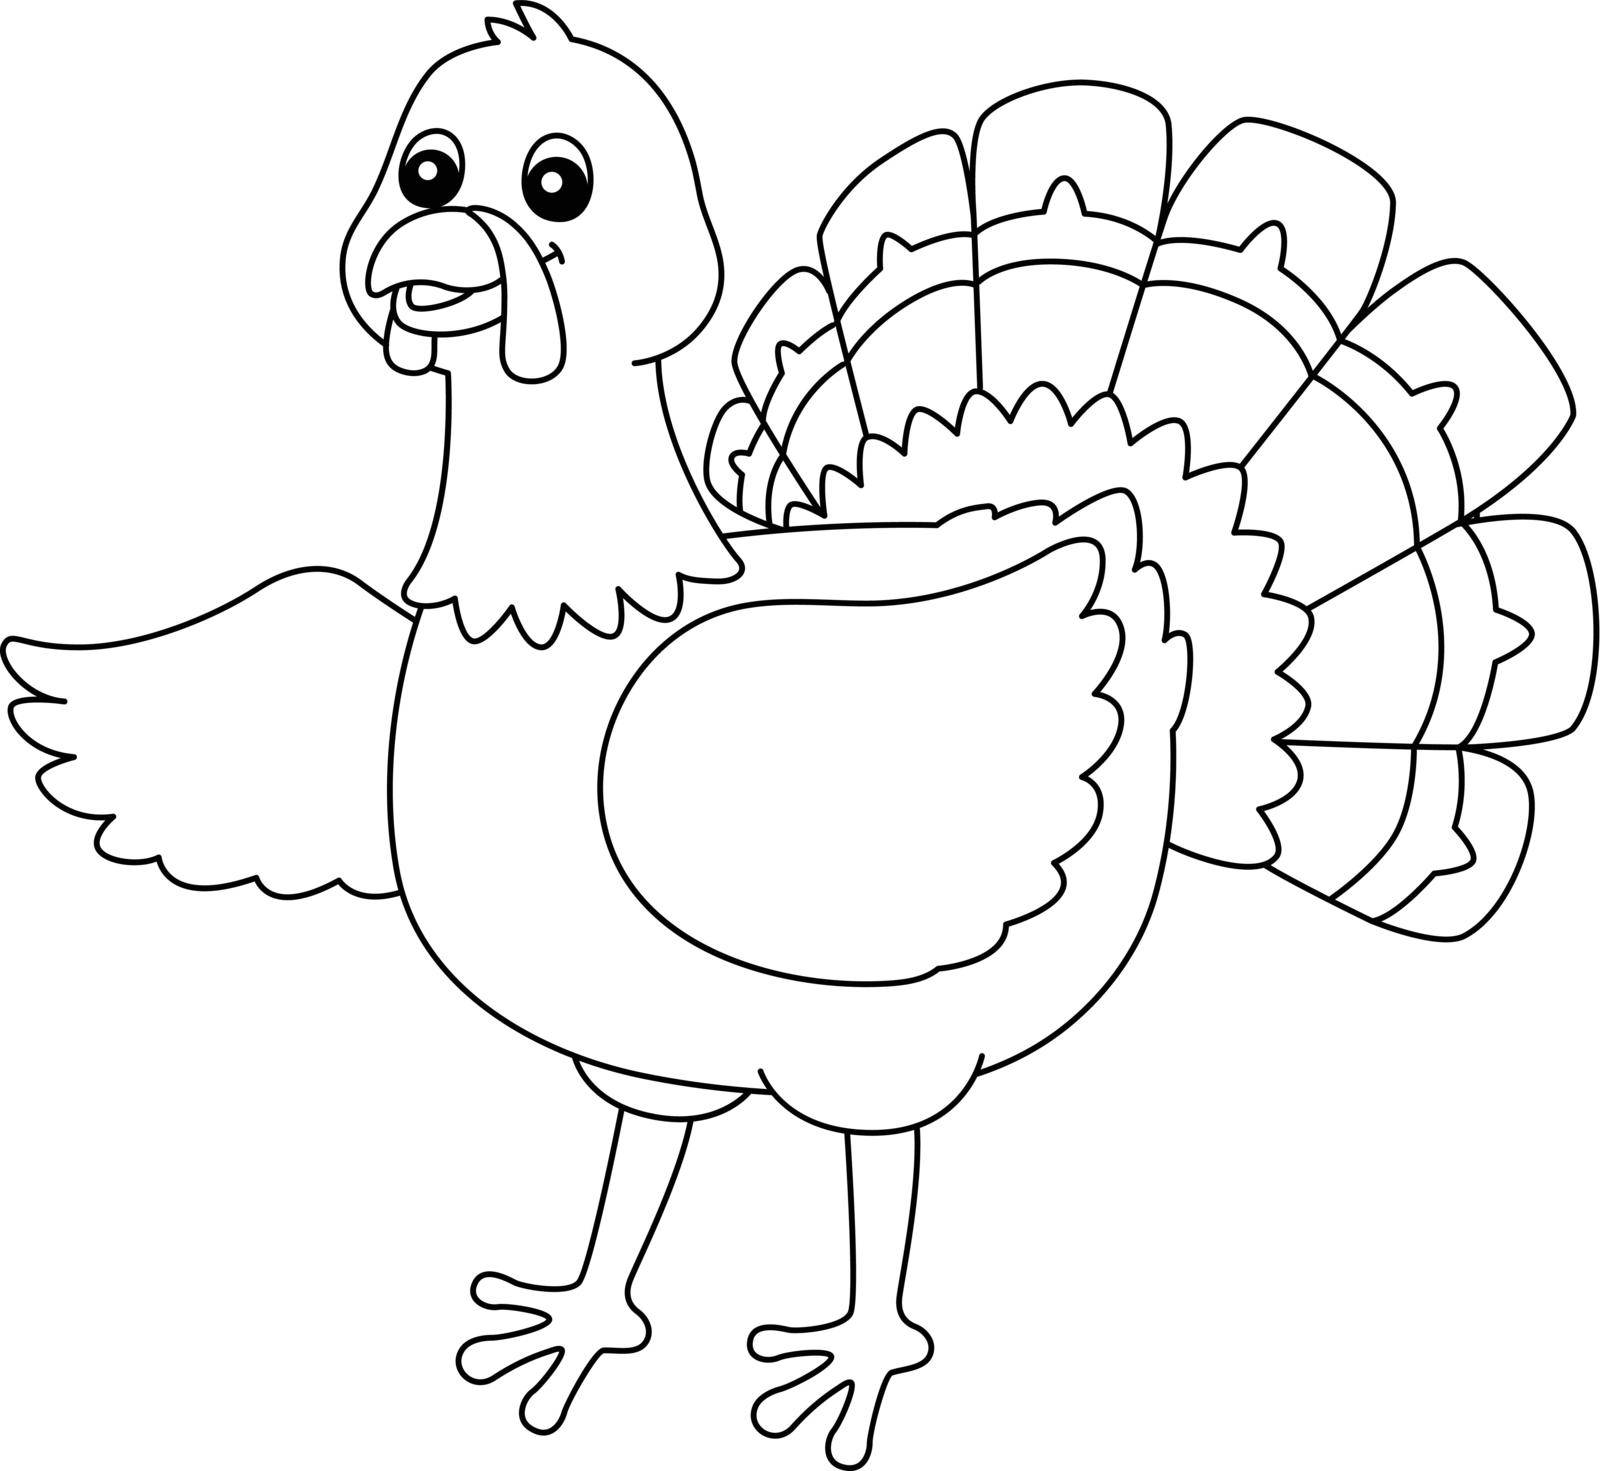 Turkey Coloring Page Isolated for Kids by abbydesign